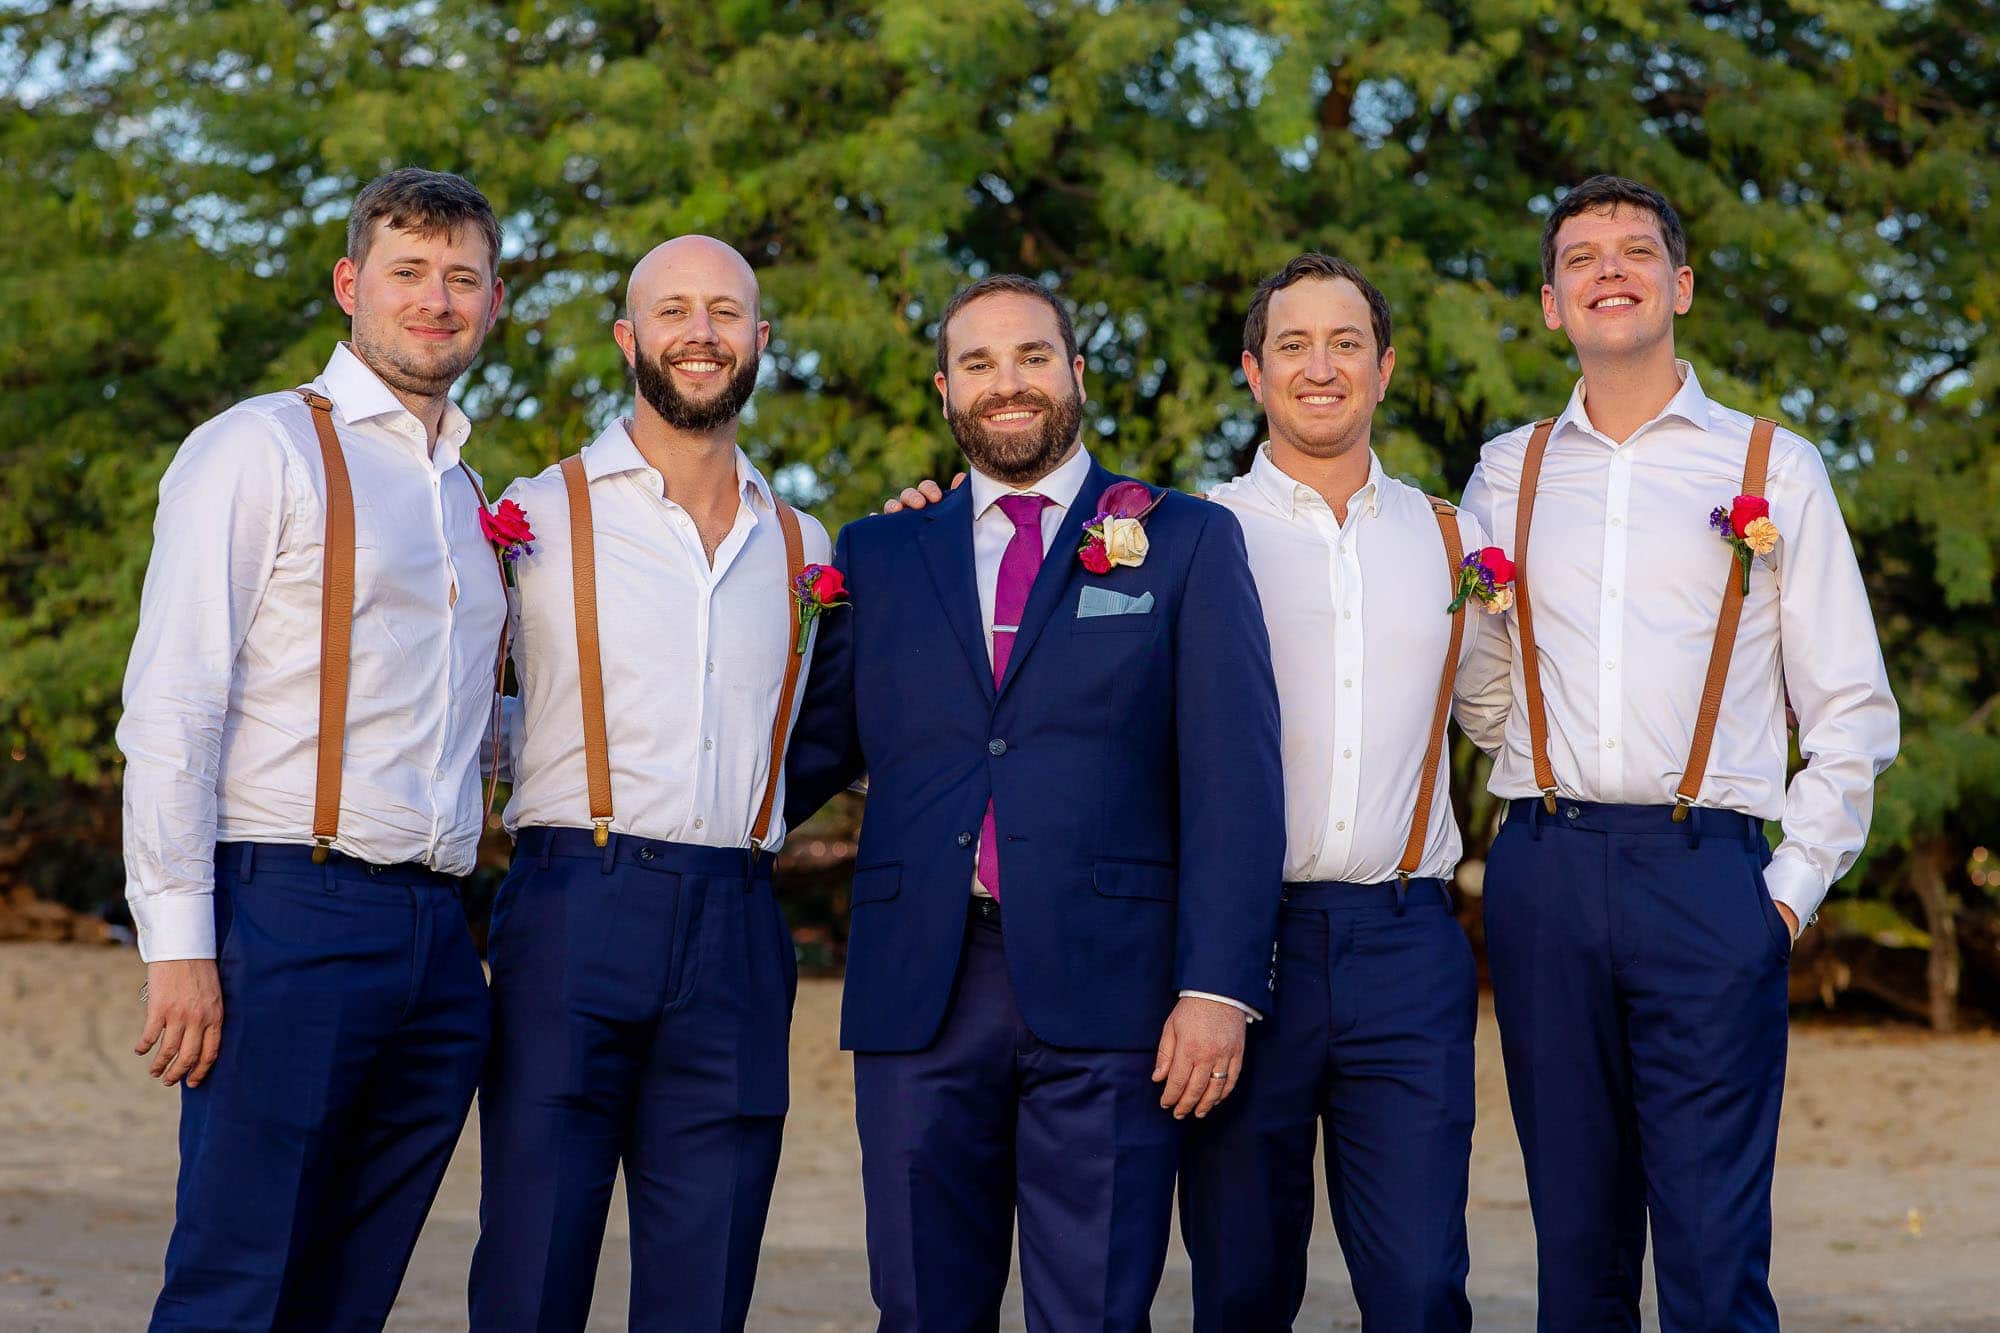 groom with his groomsmen at his dream wedding